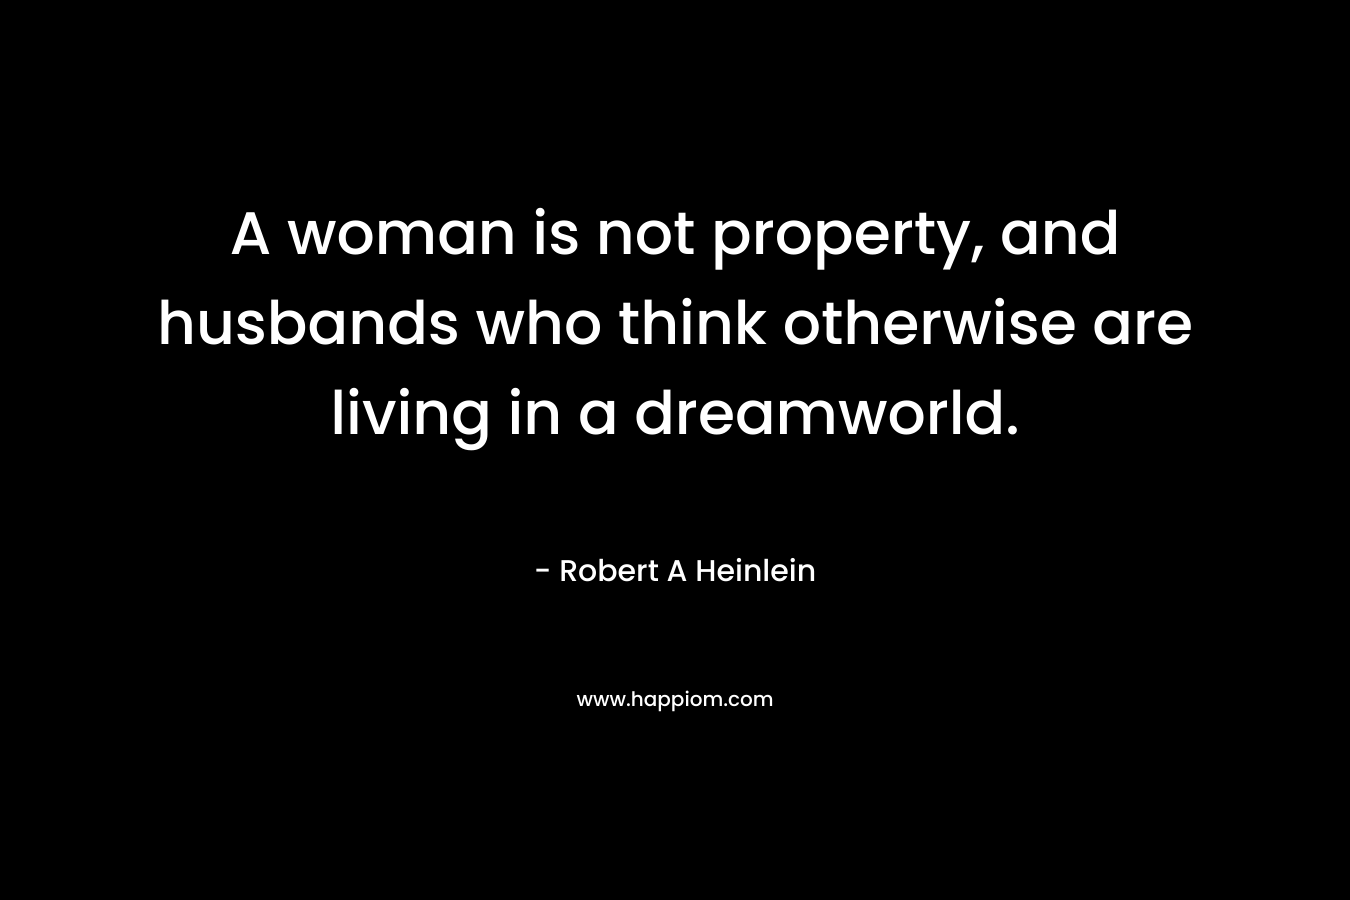 A woman is not property, and husbands who think otherwise are living in a dreamworld.